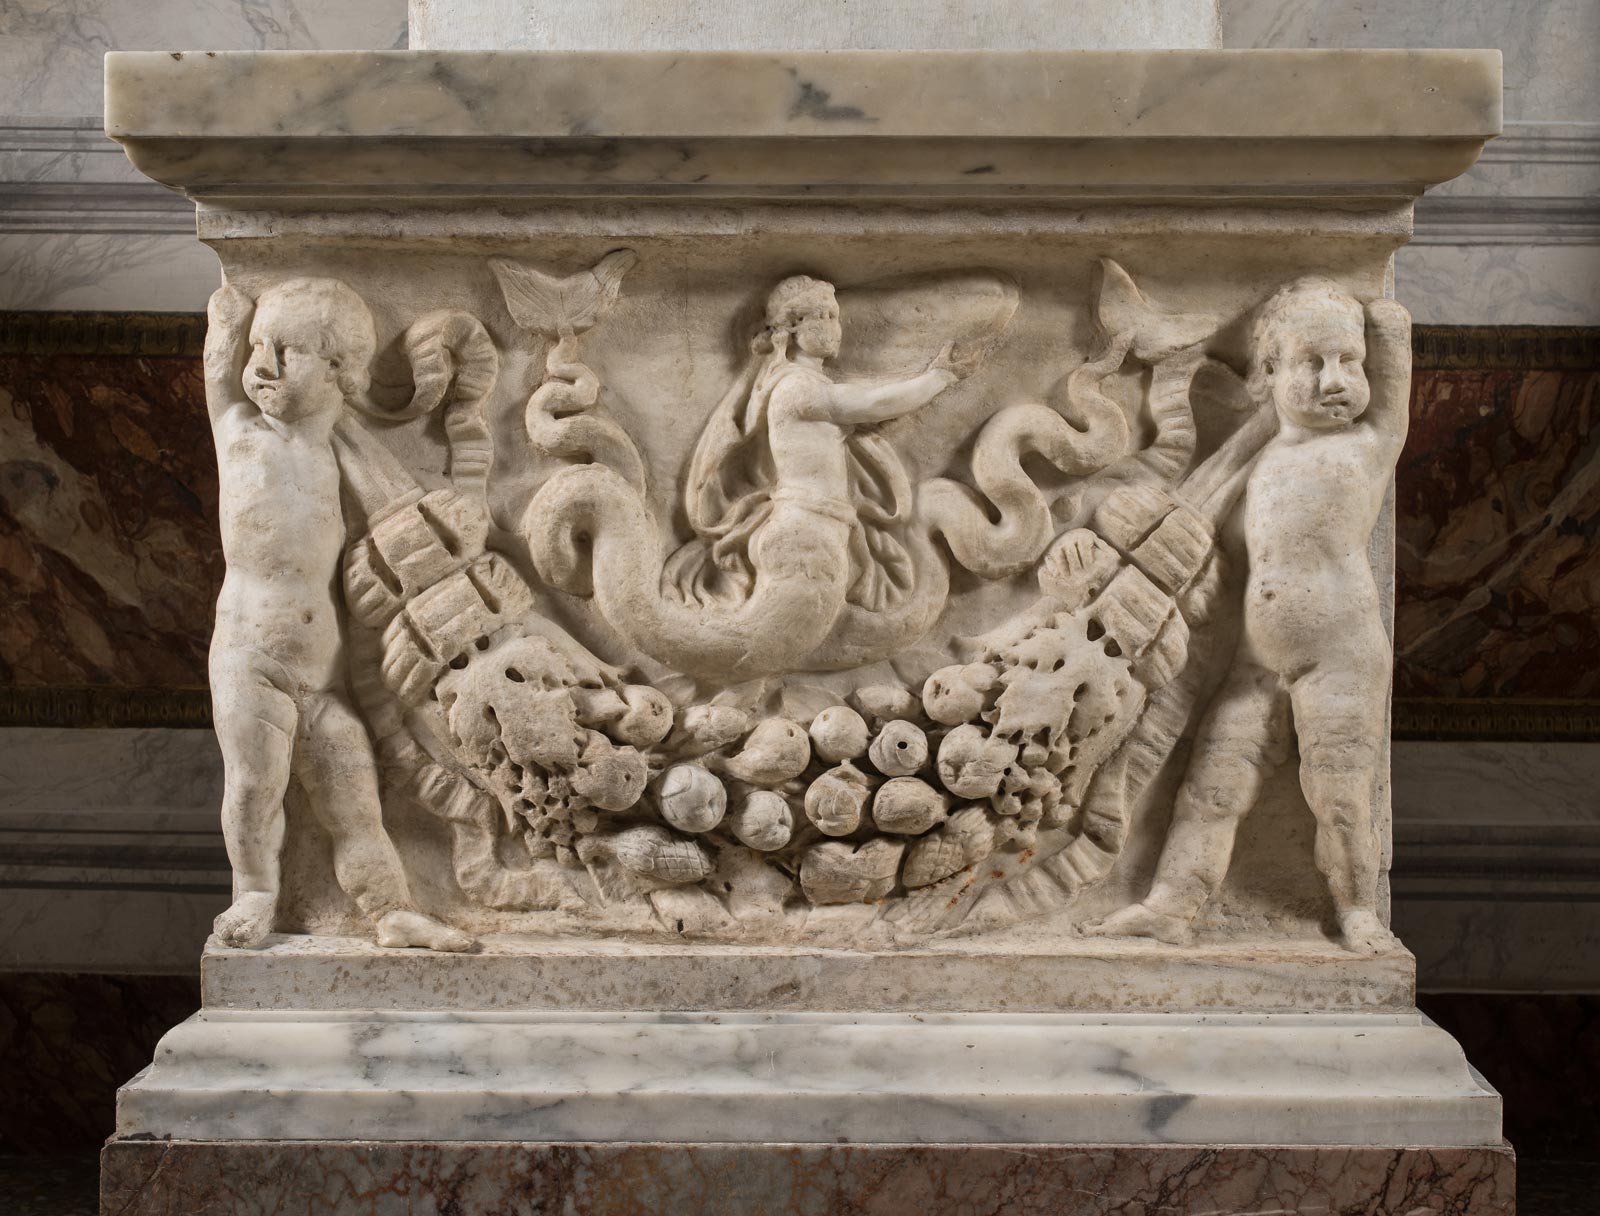 Roman art, Front of festooned sarcophagus with Nereids bearing the arms of Achilles (130-150 AD; marble, 55 x 82 cm; Rome, Galleria Borghese)